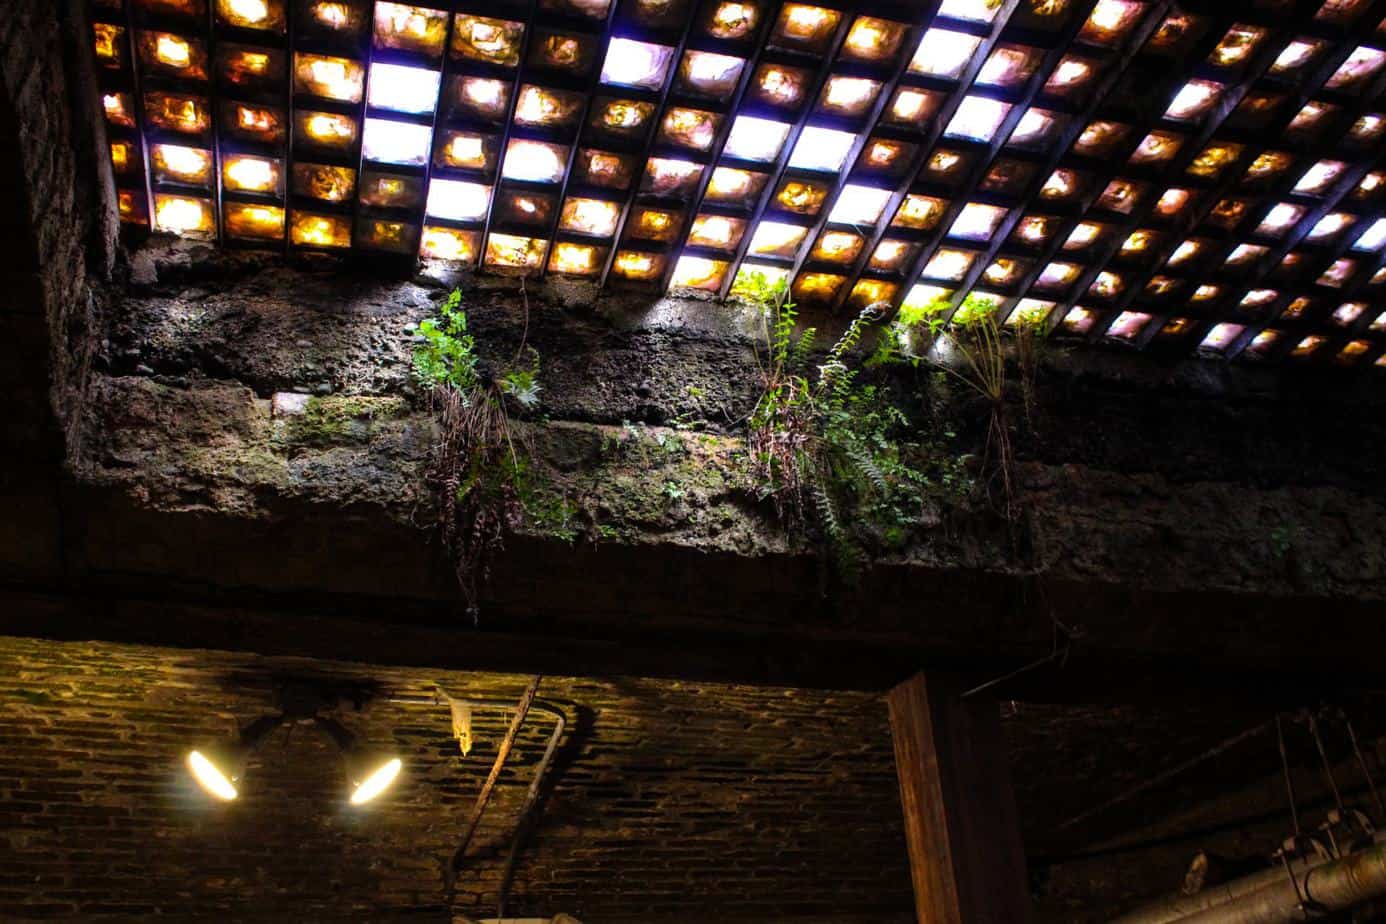 Sunlight shining through skylight from the tunnel with small plants growing near the top